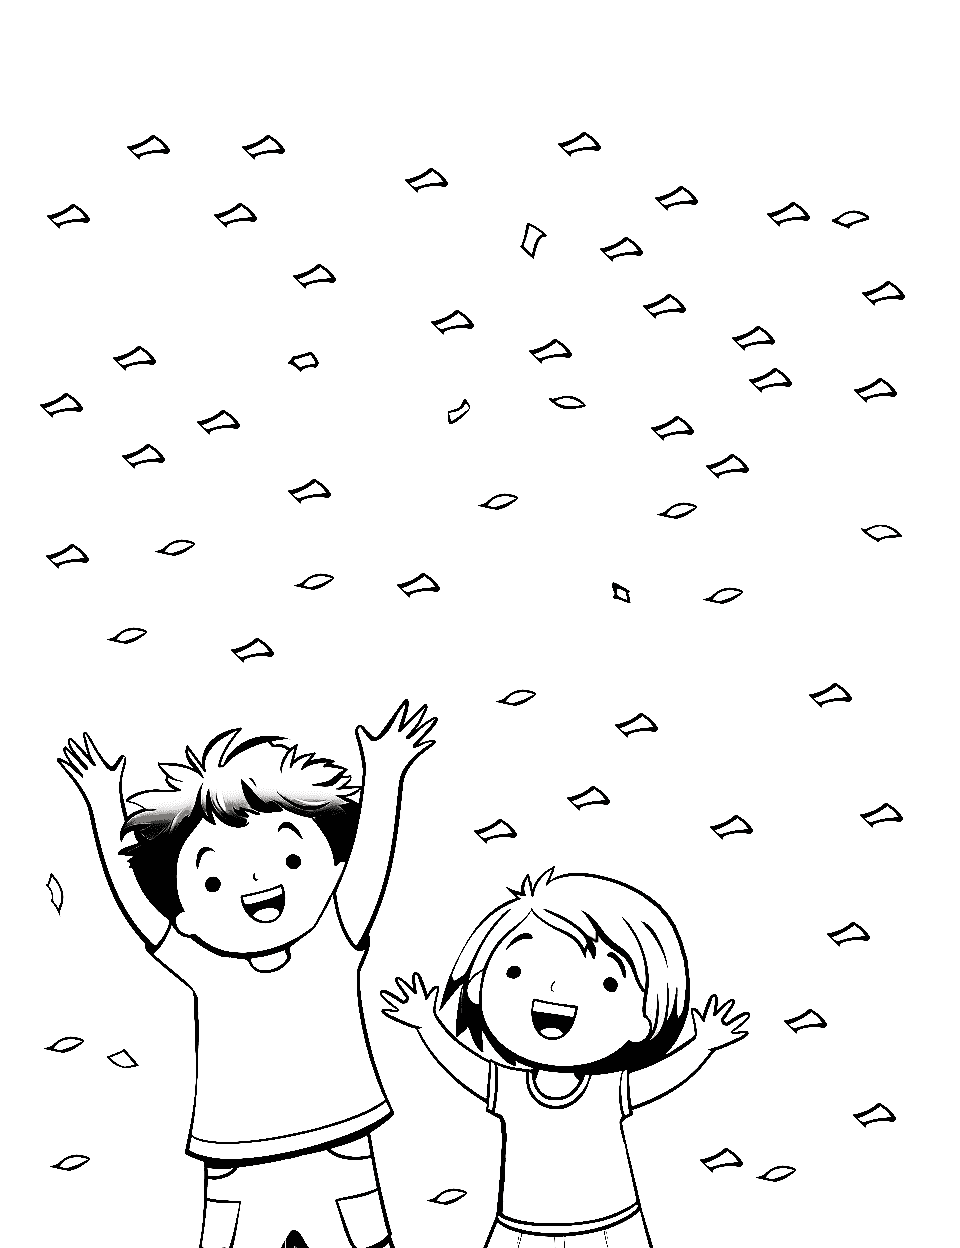 Last Day Celebration Coloring Page - Kids throwing their papers in the air, excited for summer.